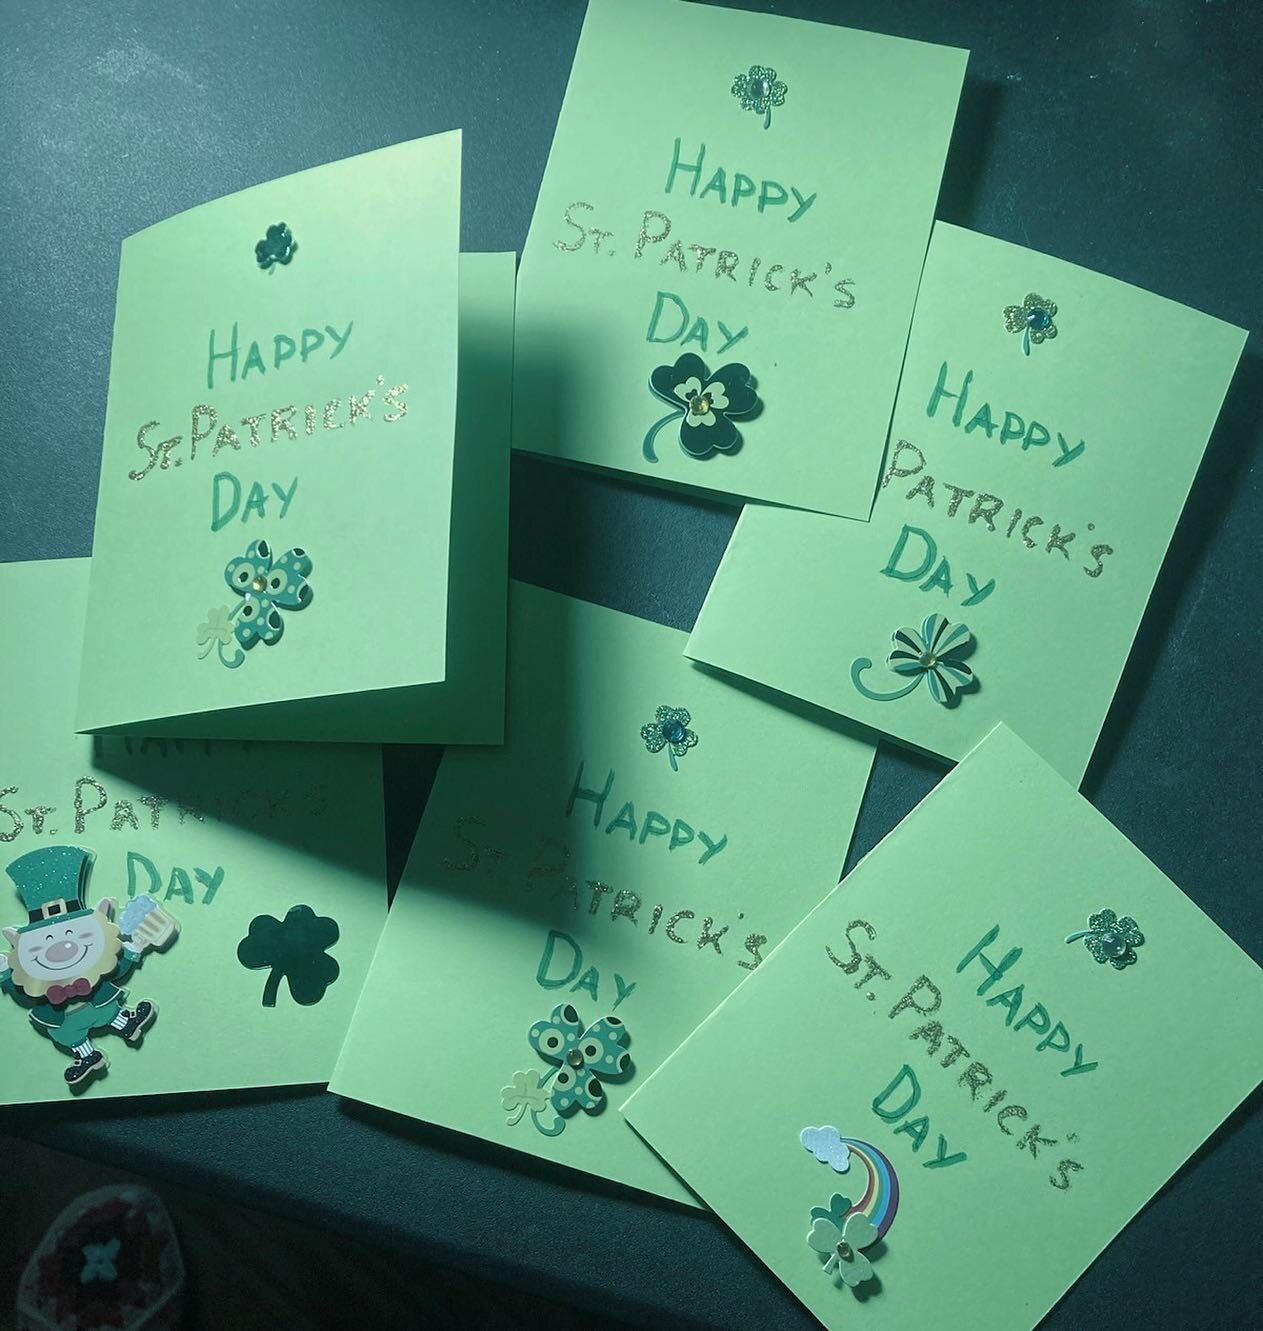 Happy St. Patrick&rsquo;s Day! ☘️🌈💰Check out these cards our virtual companionship team made!